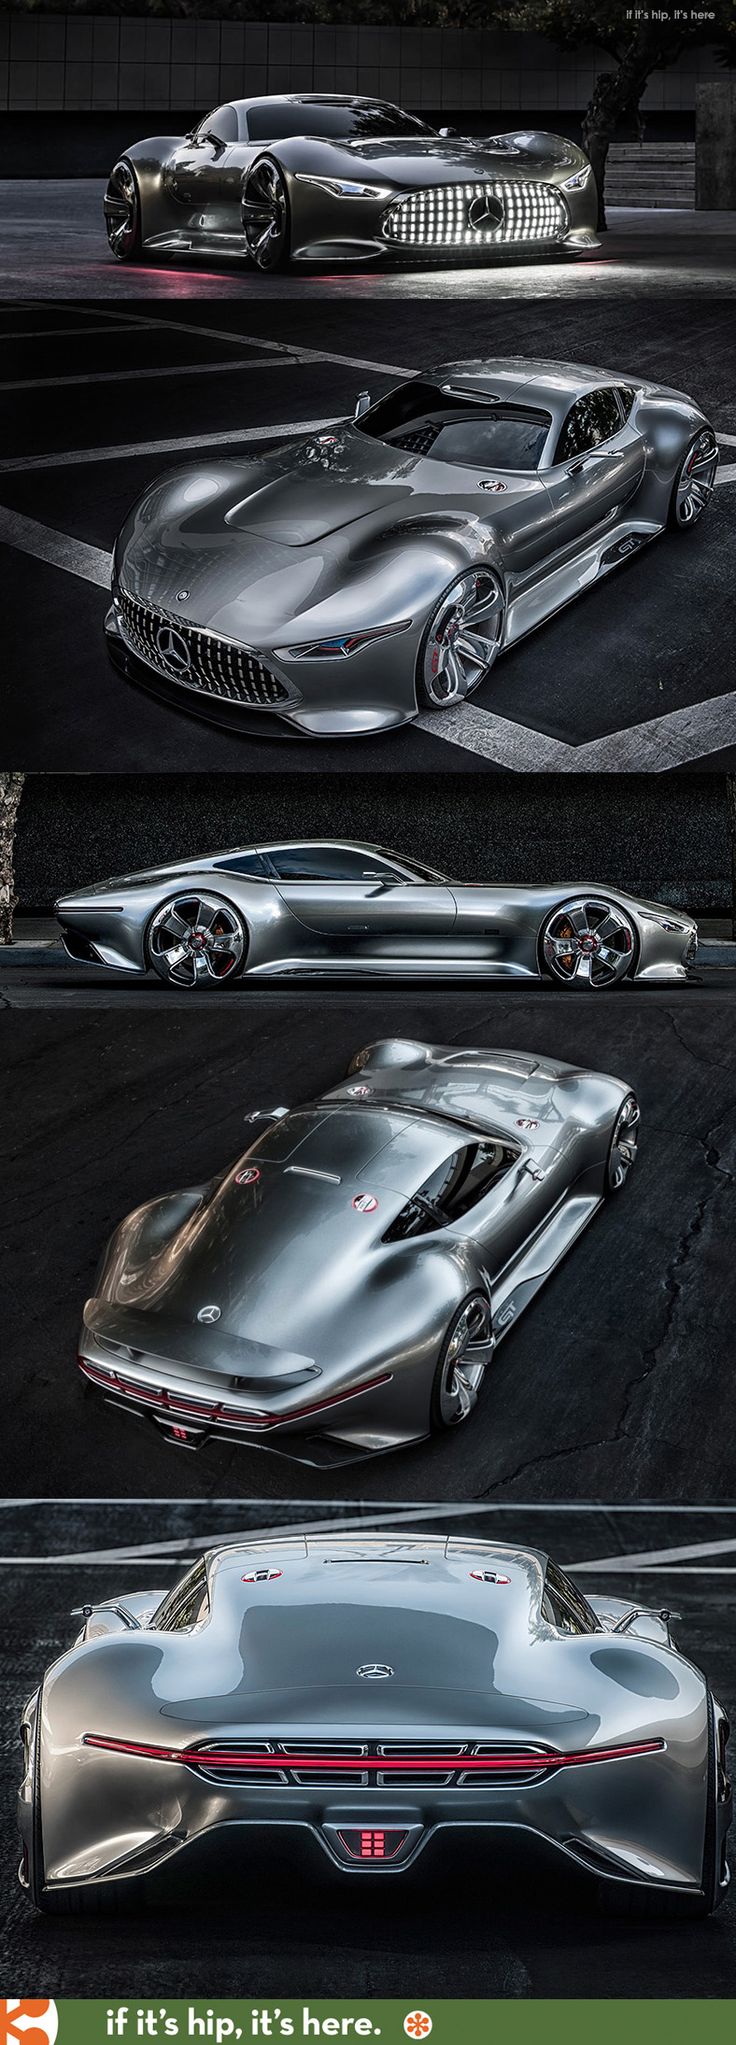 Mercedes-Benz Designs A Wicked Car Inspired By A Video Racing Game: The AMG Vision Gran Turismo.